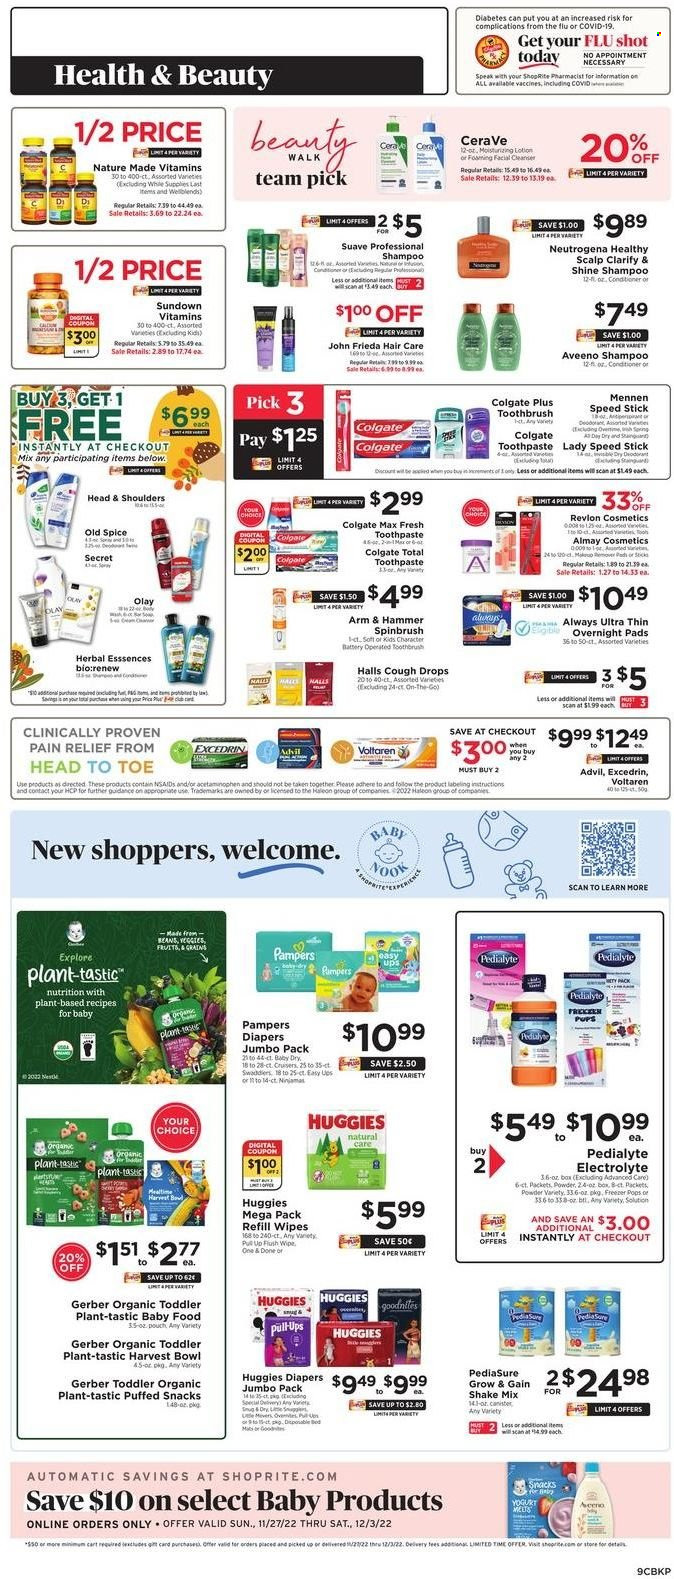 thumbnail - ShopRite Flyer - 11/27/2022 - 12/03/2022 - Sales products - yoghurt, shake, Halls, snack, Gerber, ARM & HAMMER, Tastic, spice, wipes, Huggies, Pampers, nappies, Aveeno, Gain, shampoo, Suave, Old Spice, Colgate, toothbrush, toothpaste, Always pads, sanitary pads, Almay, CeraVe, cleanser, Neutrogena, Olay, conditioner, Revlon, Head & Shoulders, John Frieda, body lotion, anti-perspirant, Speed Stick, Sure, deodorant, canister, bowl, Excedrin, Nature Made, pain relief, Advil Rapid, cough drops. Page 9.